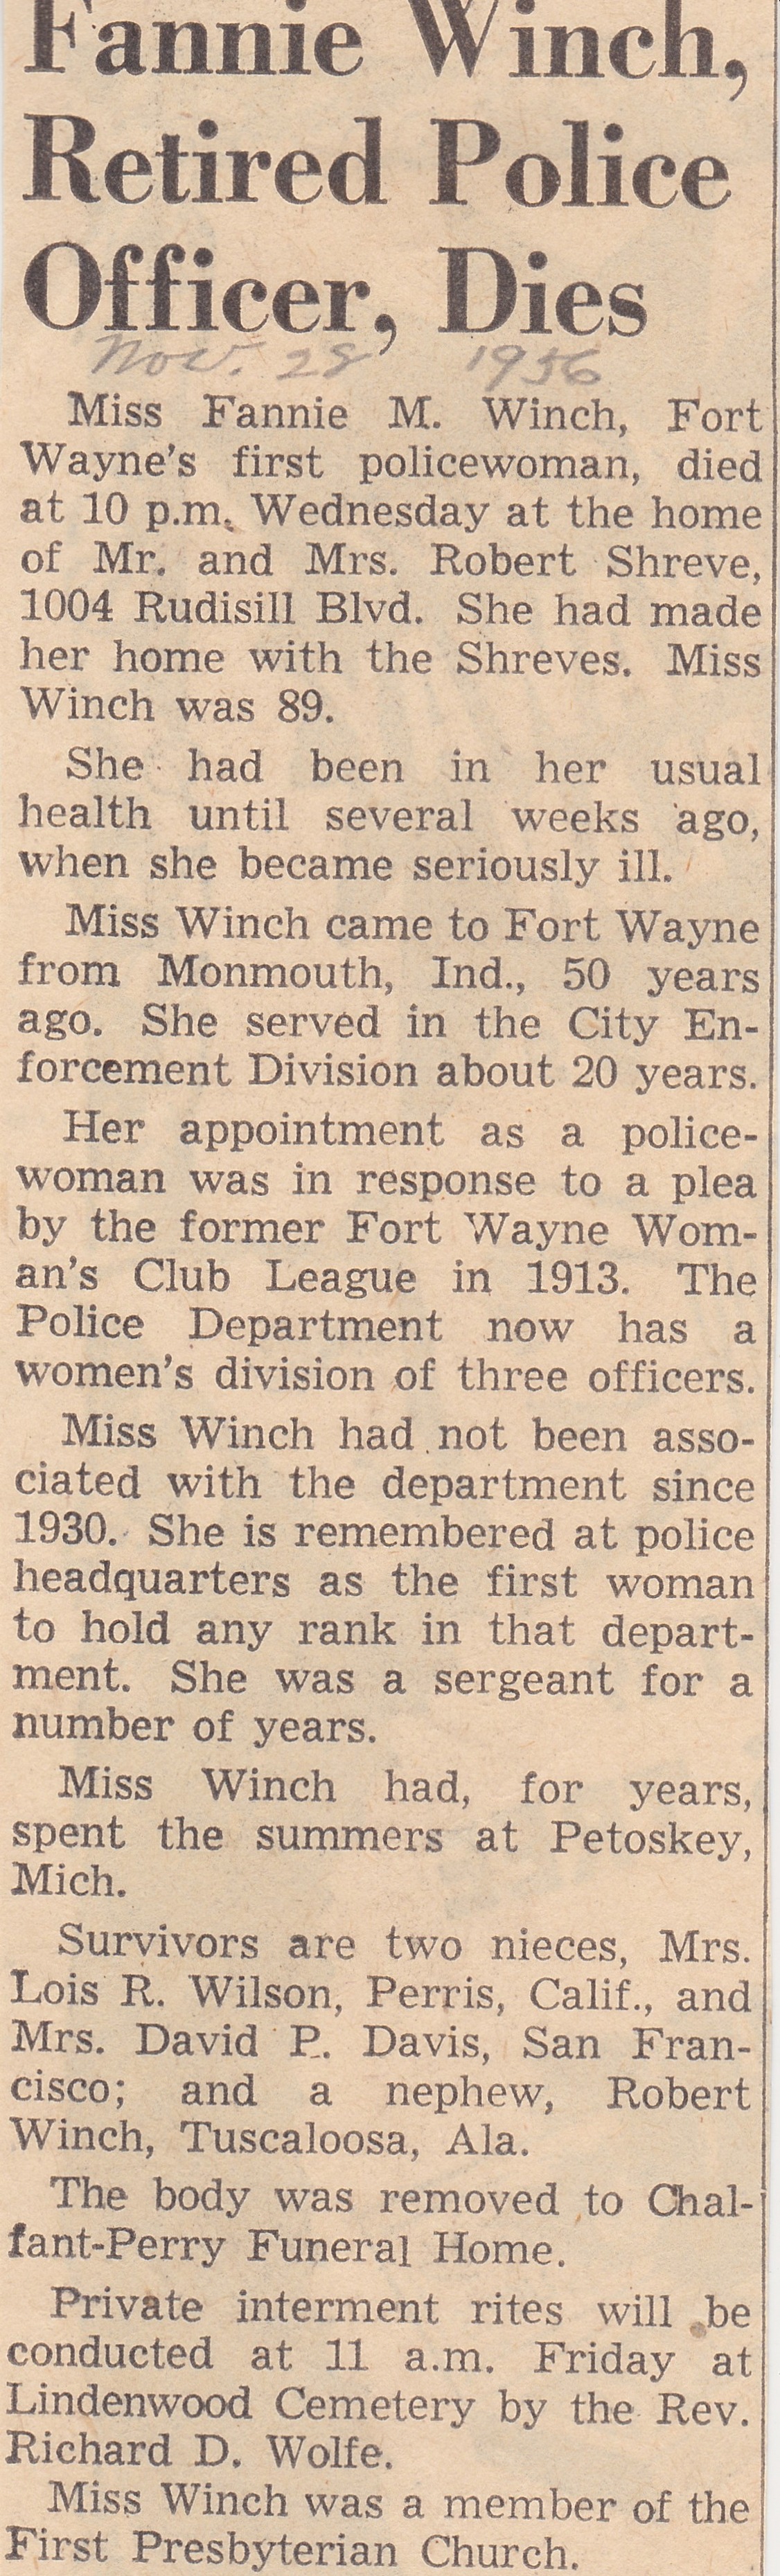 Fannie Winch first woman police officer